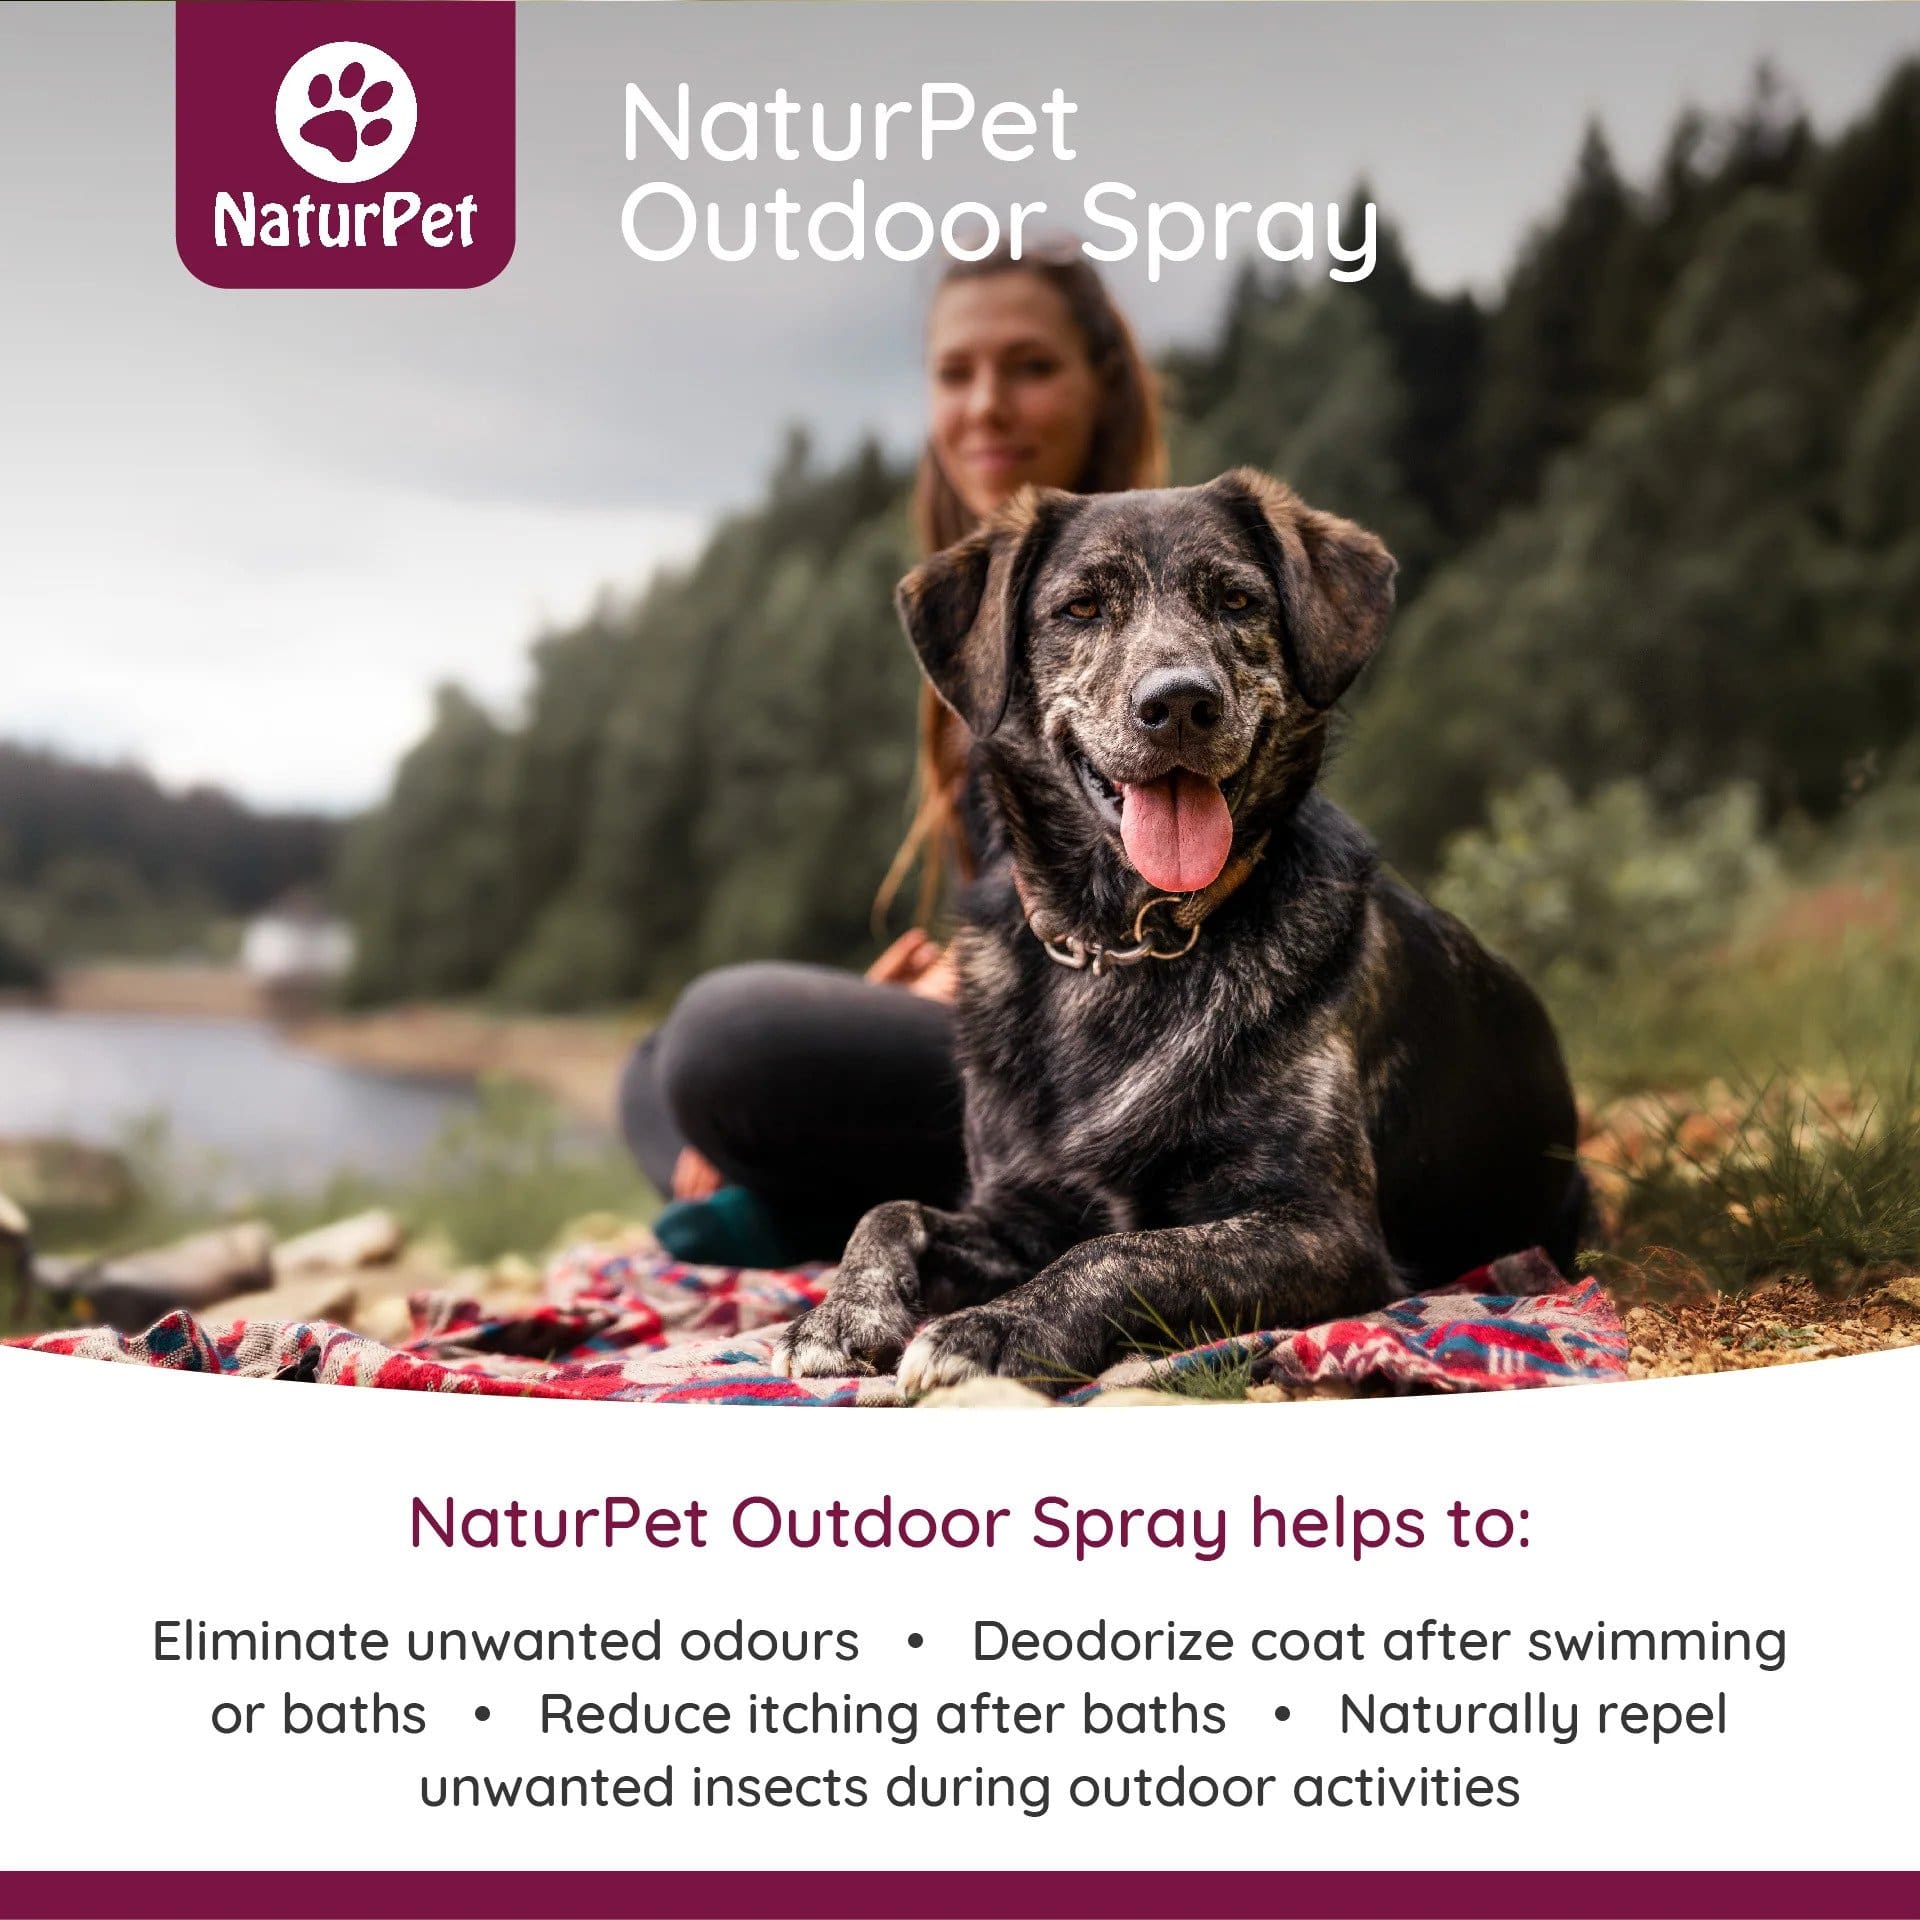 NaturPet Outdoor Spray - A Must-Have For Hikes & Wet Dogs! Benefits